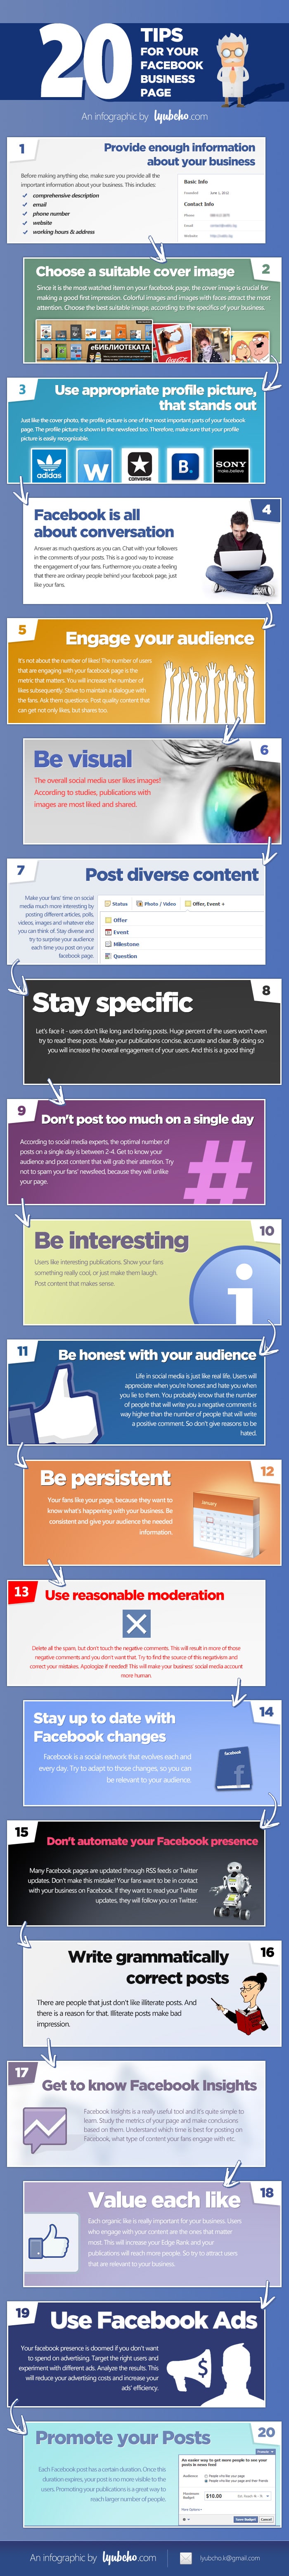 20 Vital Success Tips For Your Facebook Business Page [Infographic]